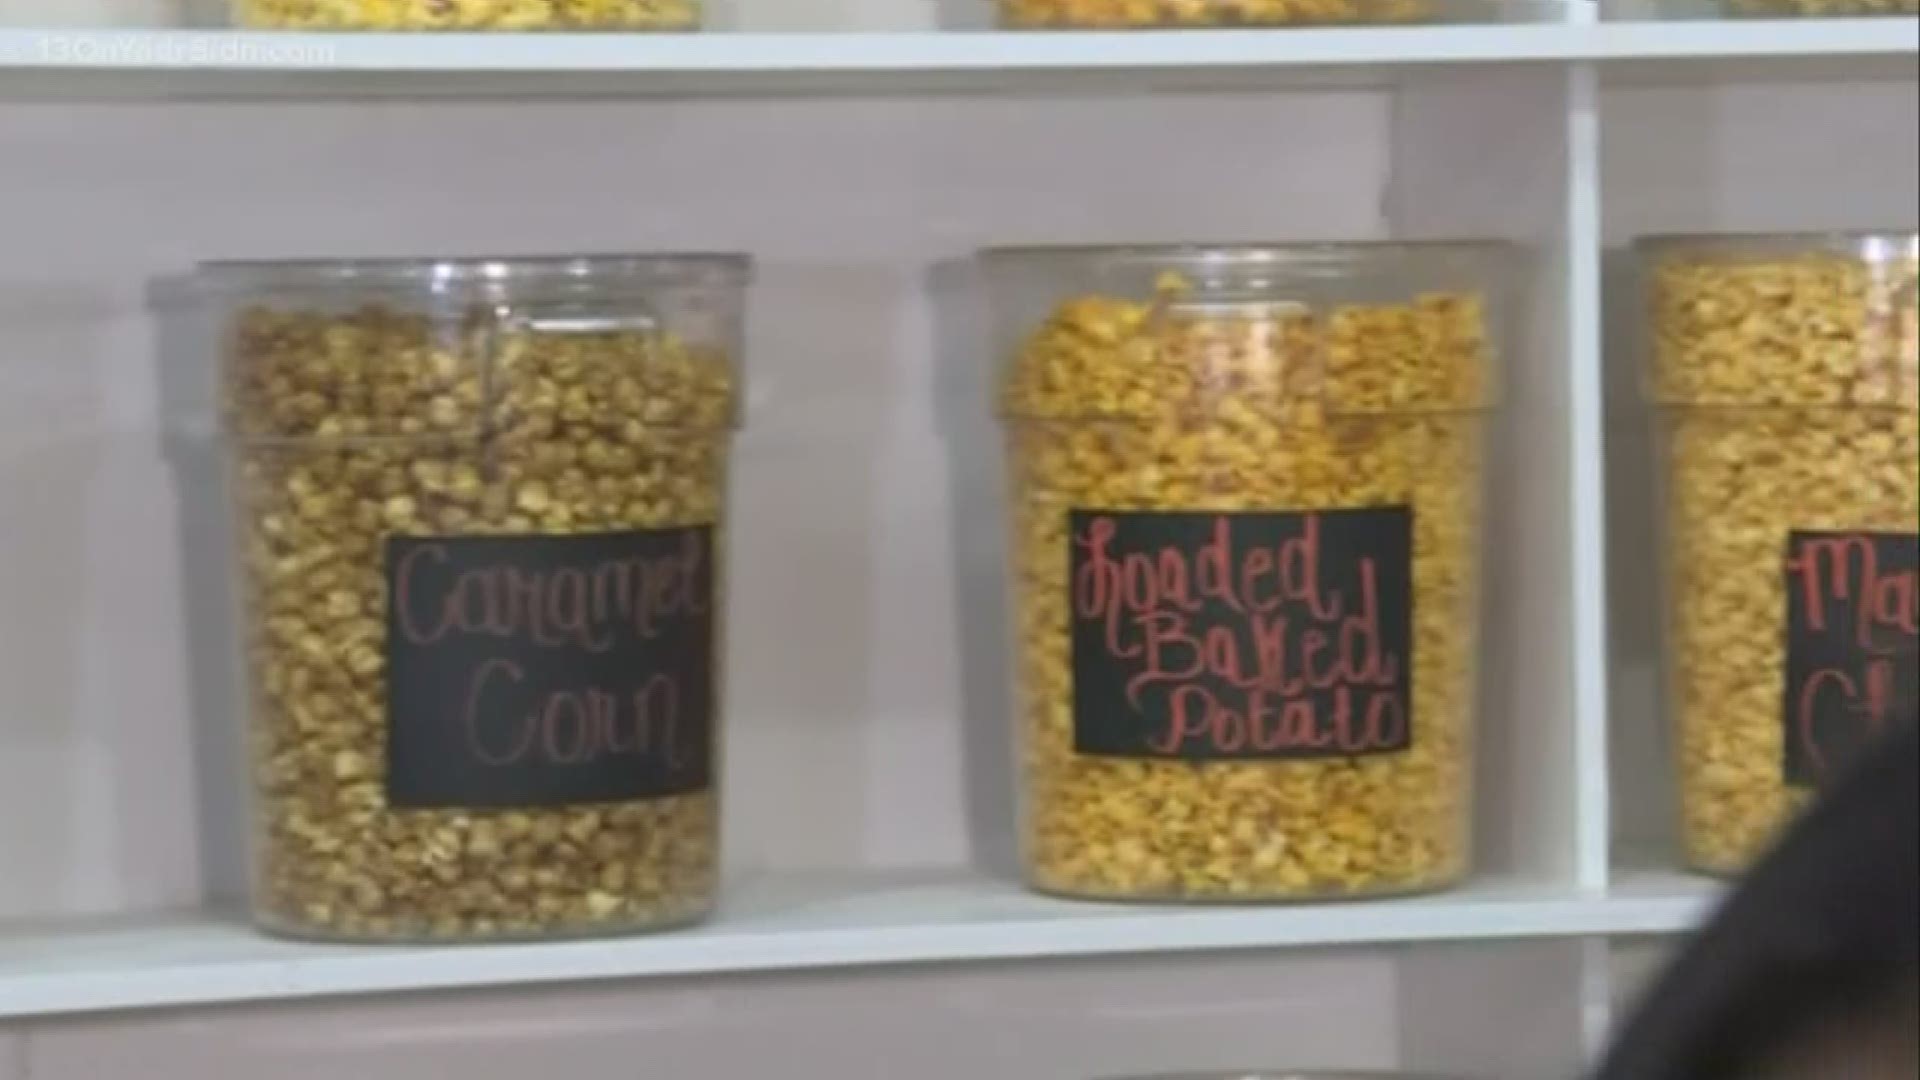 See how recent grants from Downtown Grand Rapids, Inc. is impacting businesses like Mosby's Popcorn.